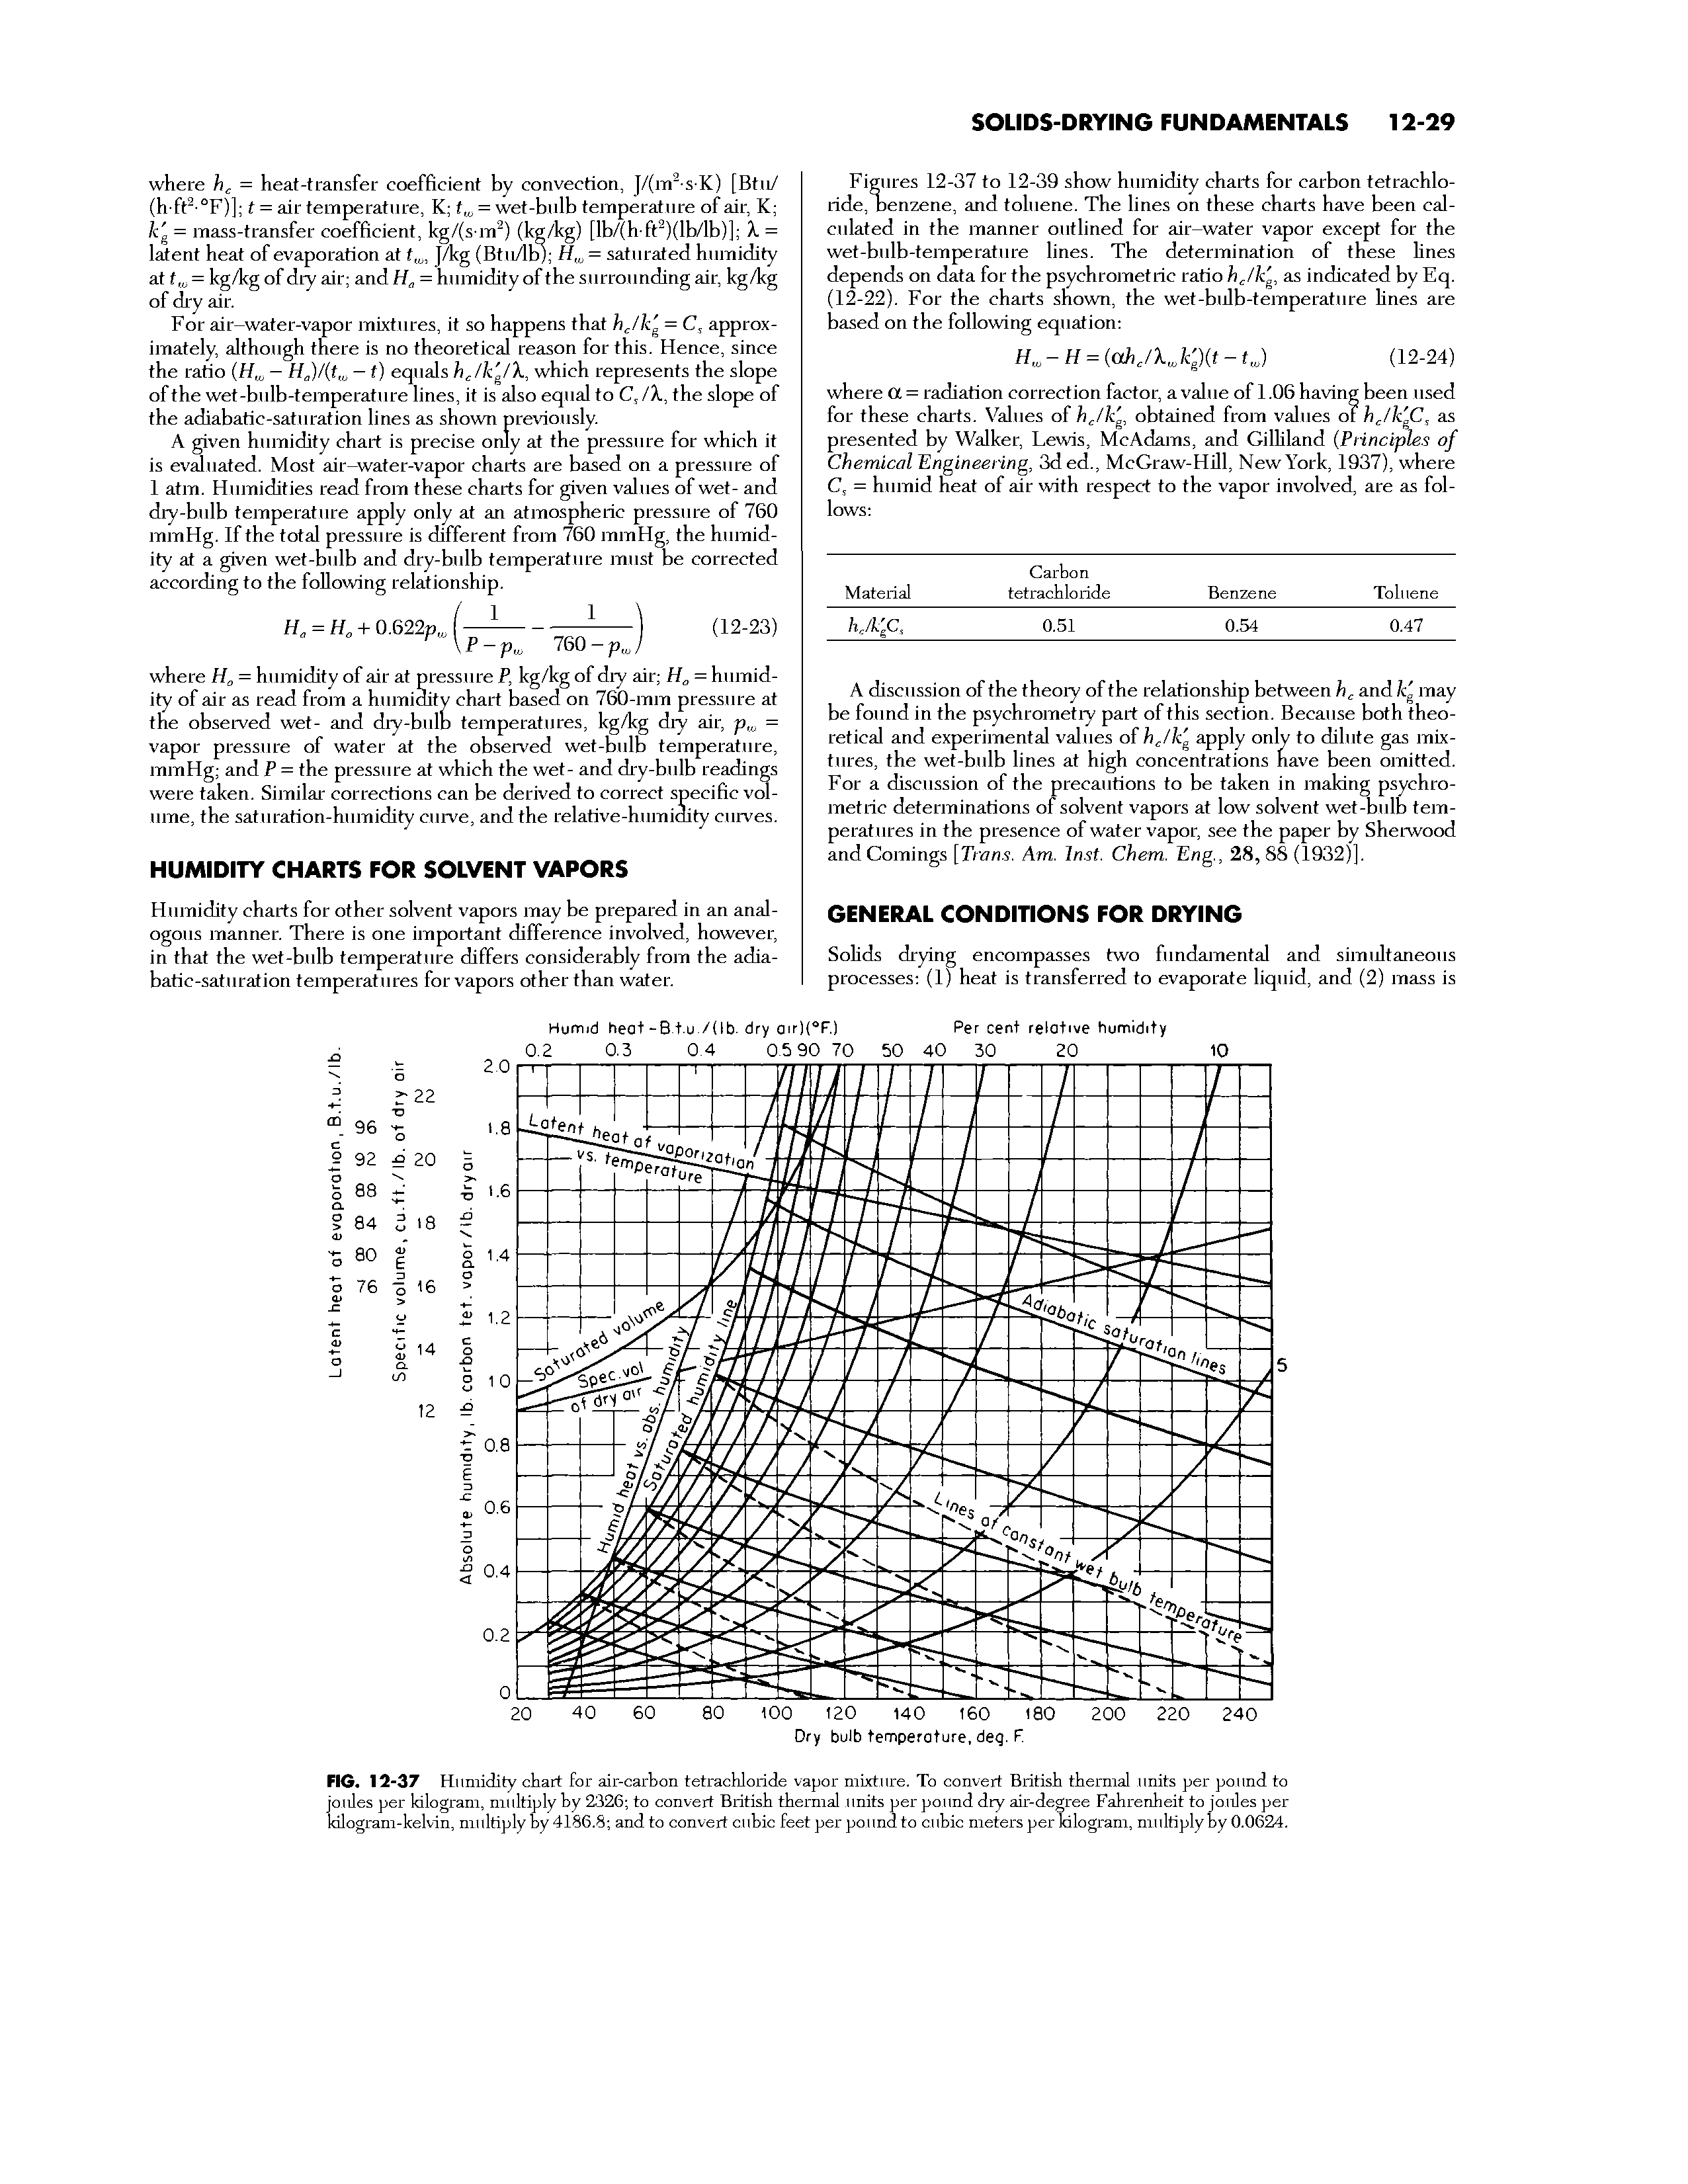 Figures 12-37 to 12-39 show humidity charts for carbon tetrachloride, oenzene, and toluene. The lines on these charts have been calculated in the manner outlined for air-water vapor except for the wet-bulb-temperature lines. The determination of these hnes depends on data for the psychrometric ratio /j Z/c, as indicated by Eq. (12-22). For the charts shown, the wet-bulb-temperature hnes are based on the following equation ...